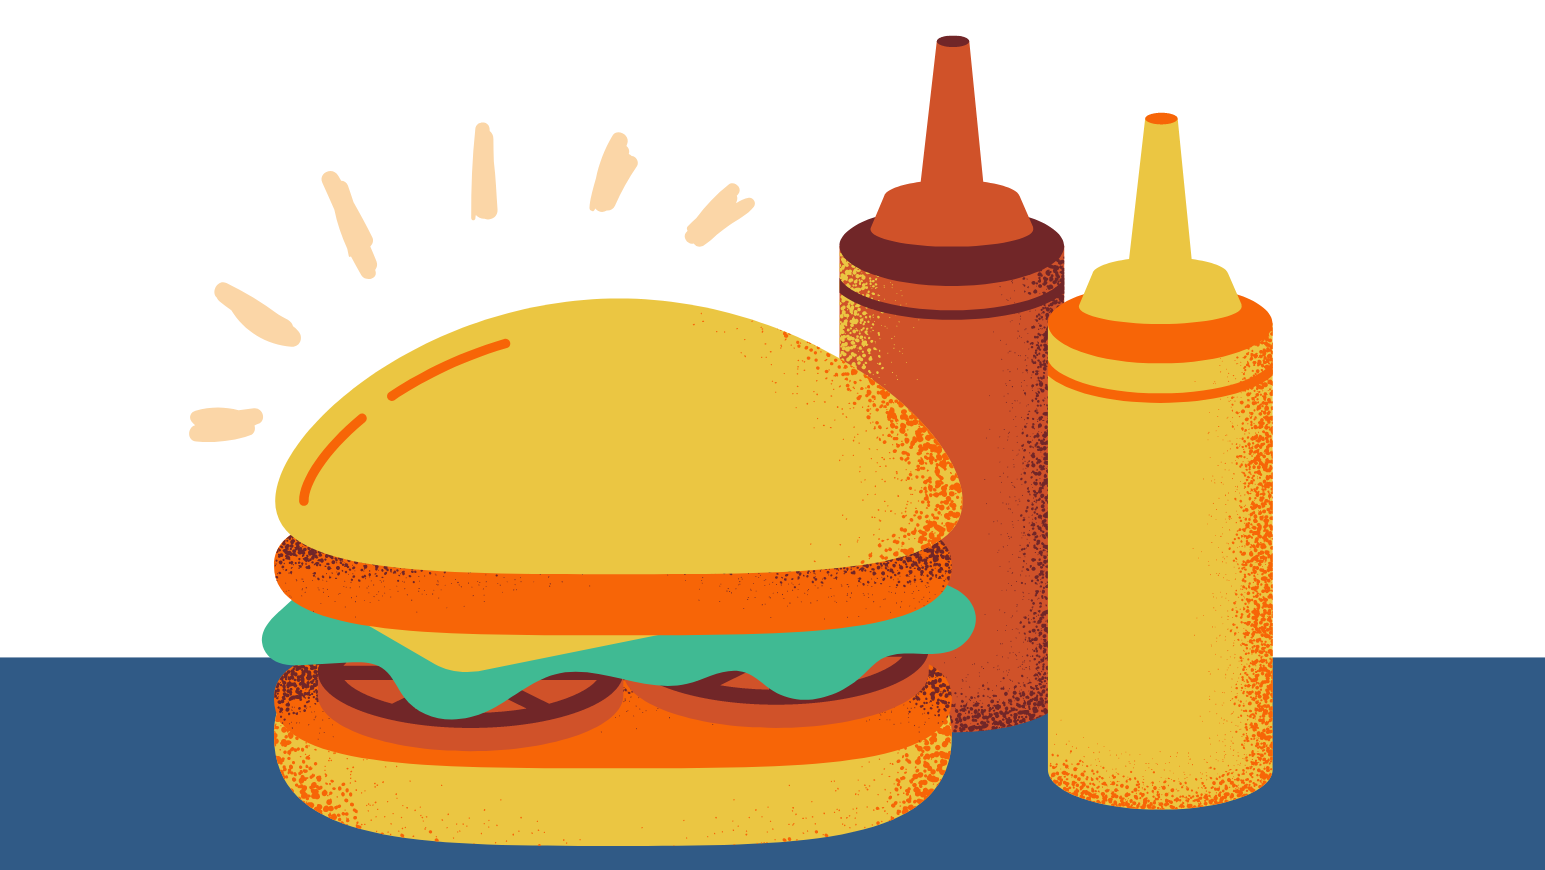 hamburger with cheese, lettuce, tomatoes, beef all on a yellow bun next to a red ketchup container and yellow mustard container